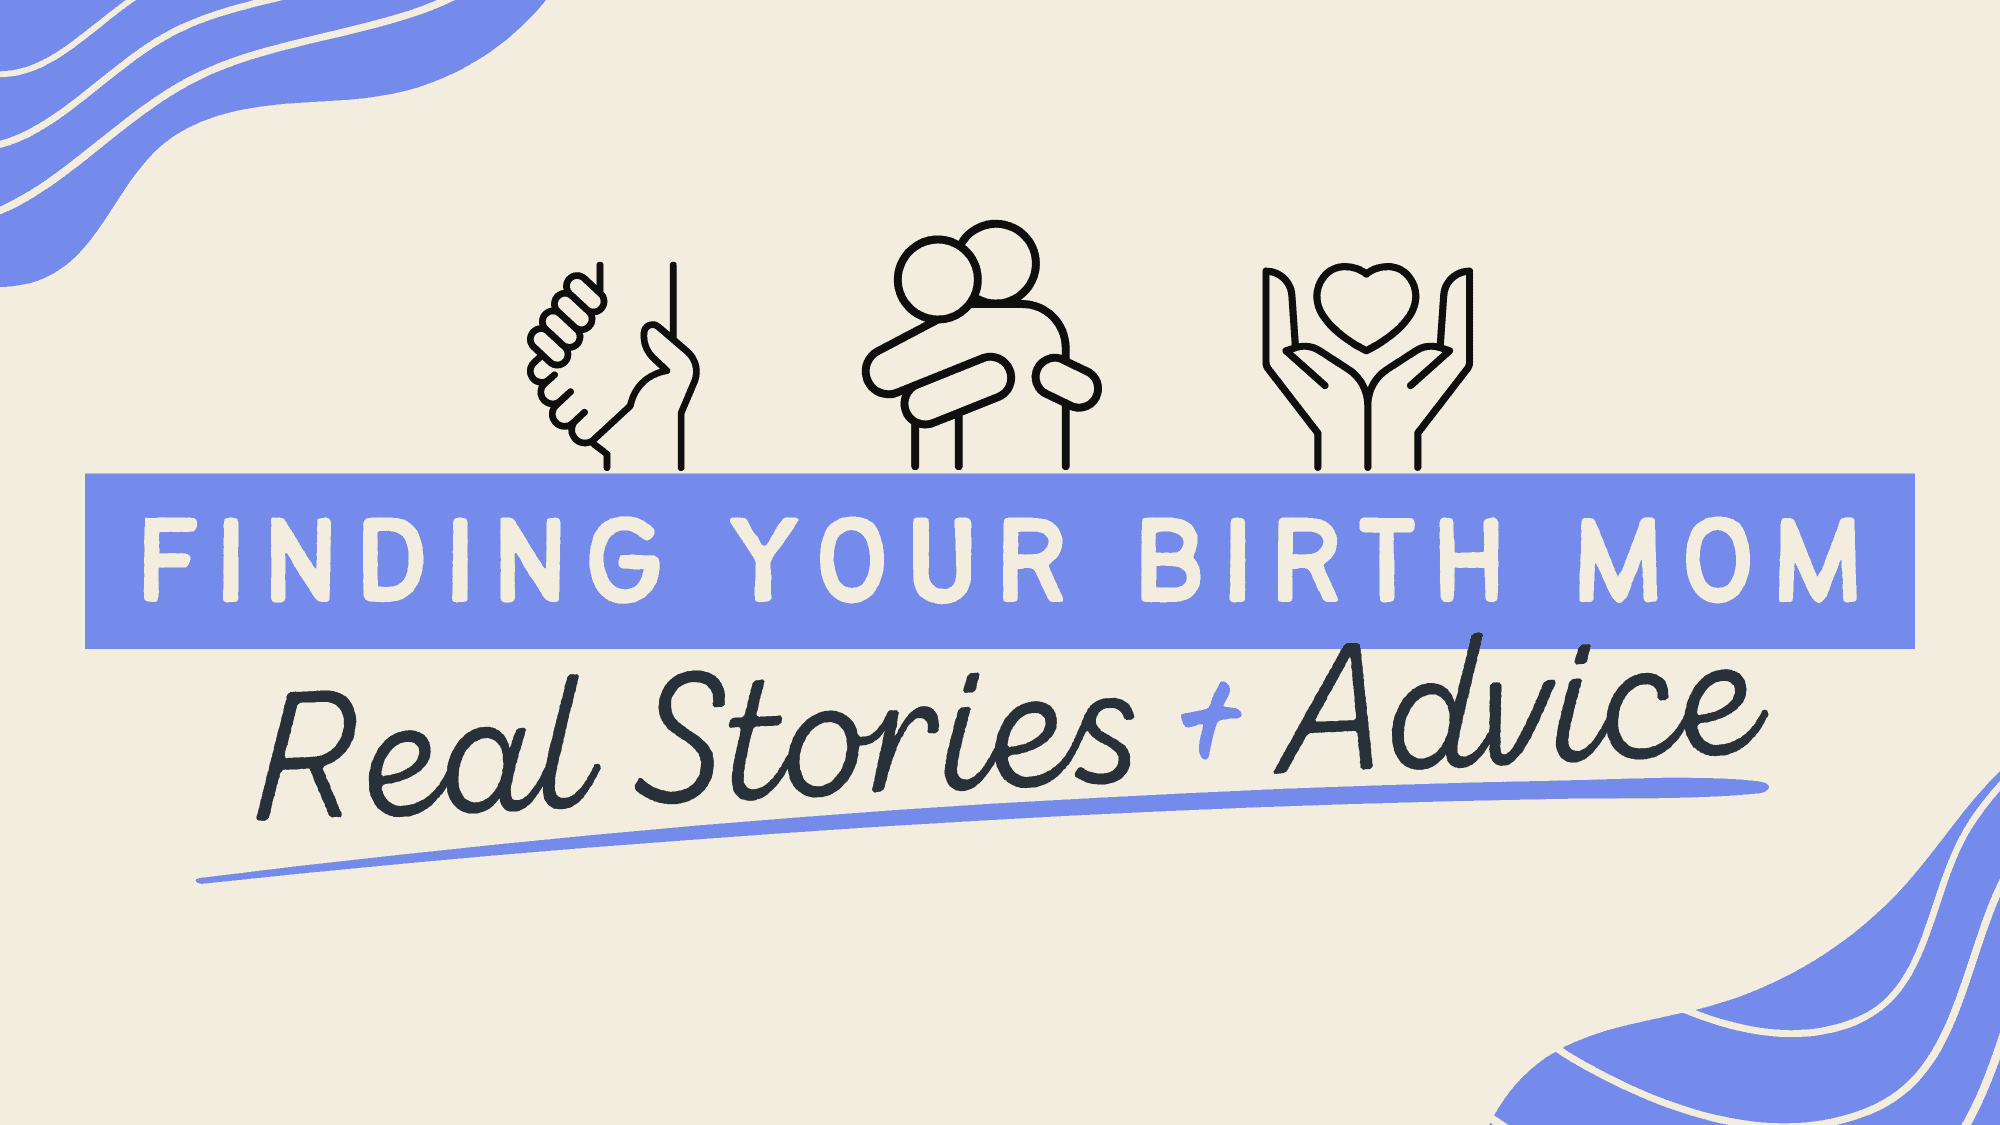 how to find your birth mother real stories advice image